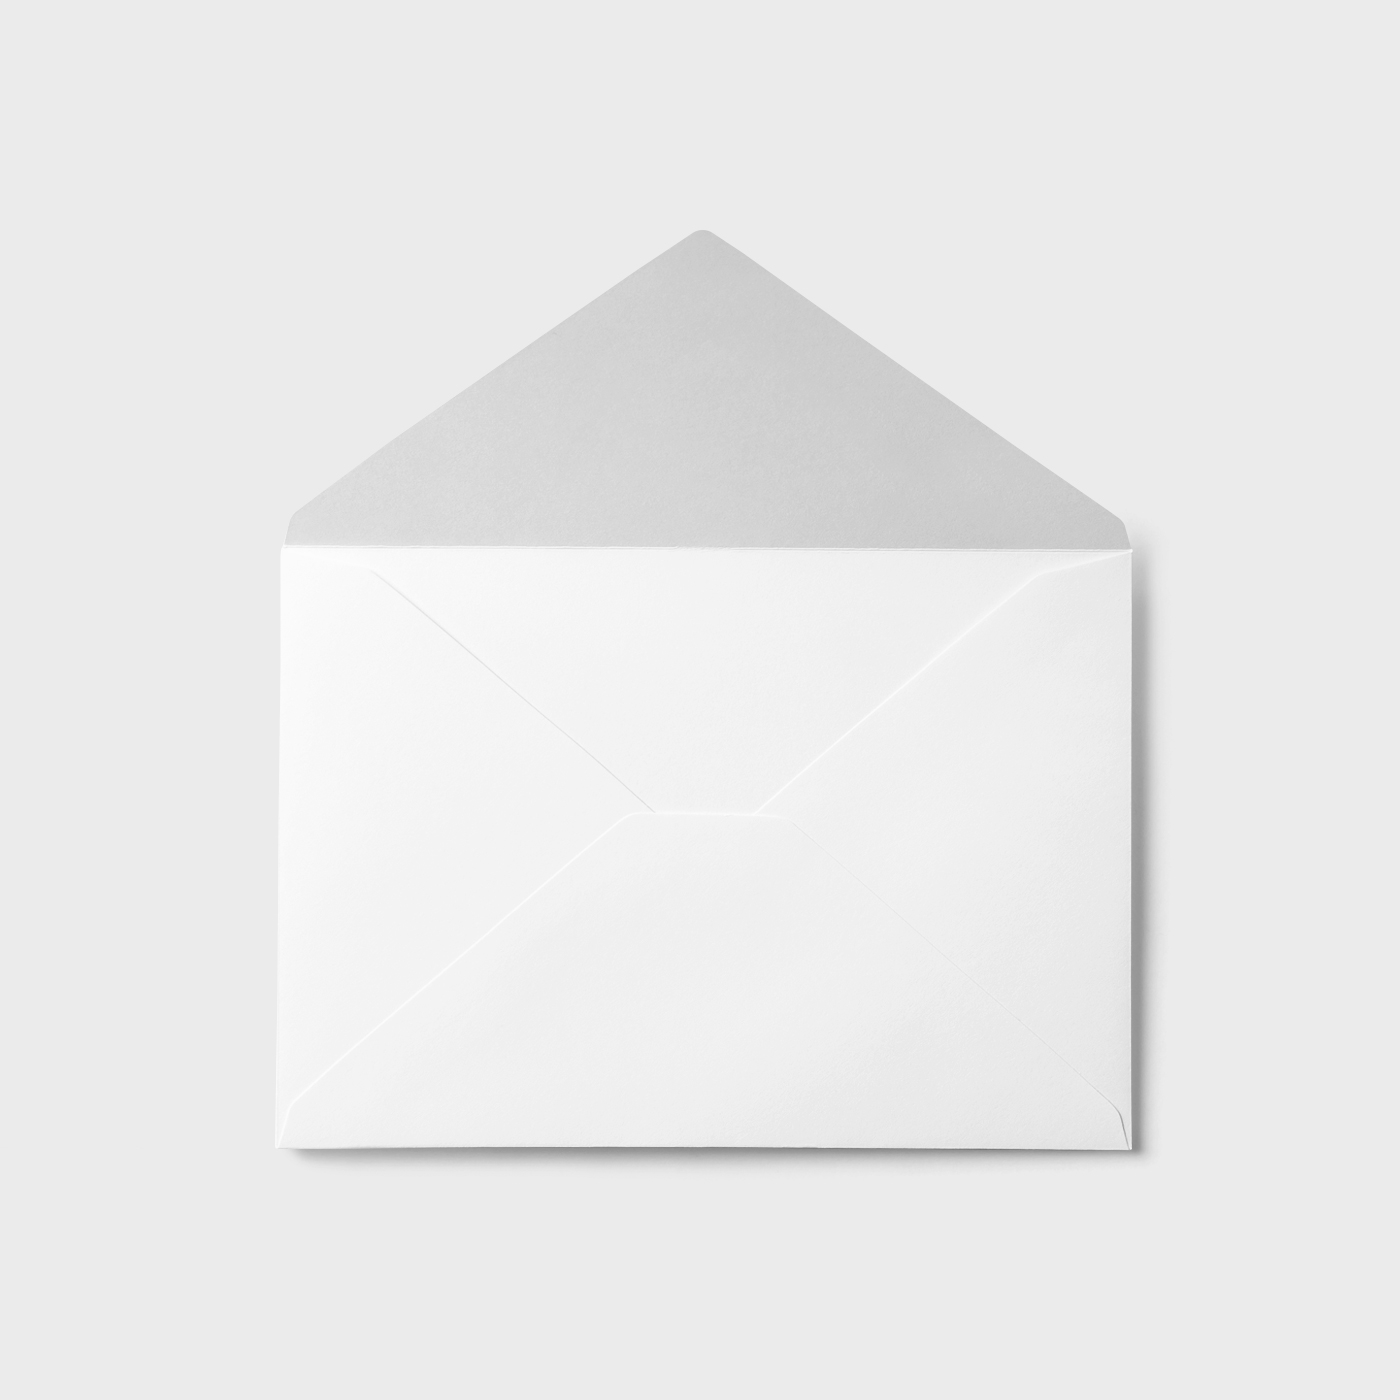 Top View of a Classic Open Envelope Mockup FREE PSD